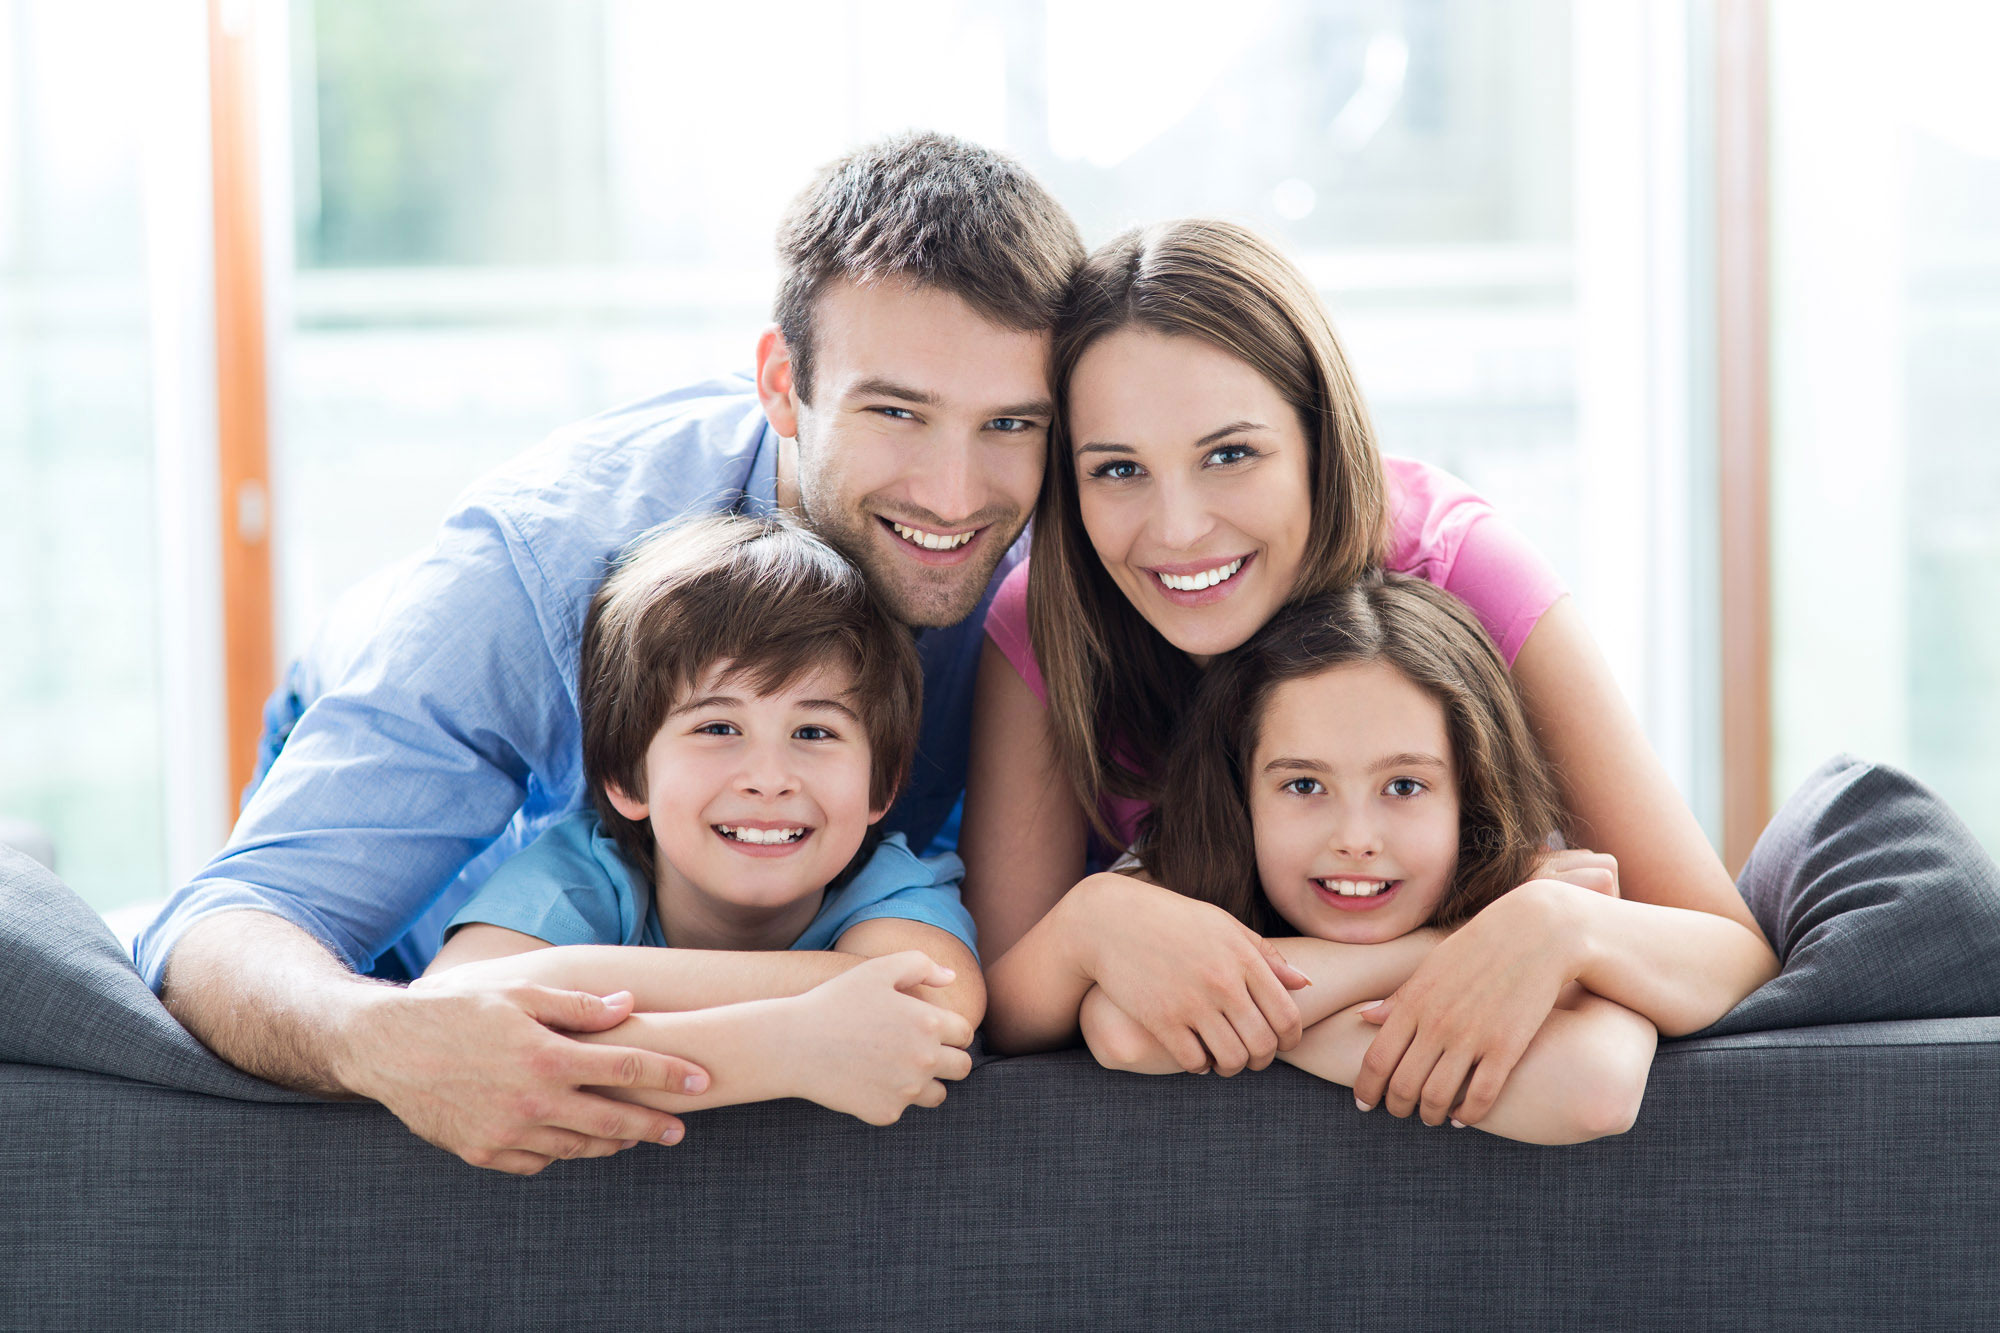 family on couch showing teeth smiling.